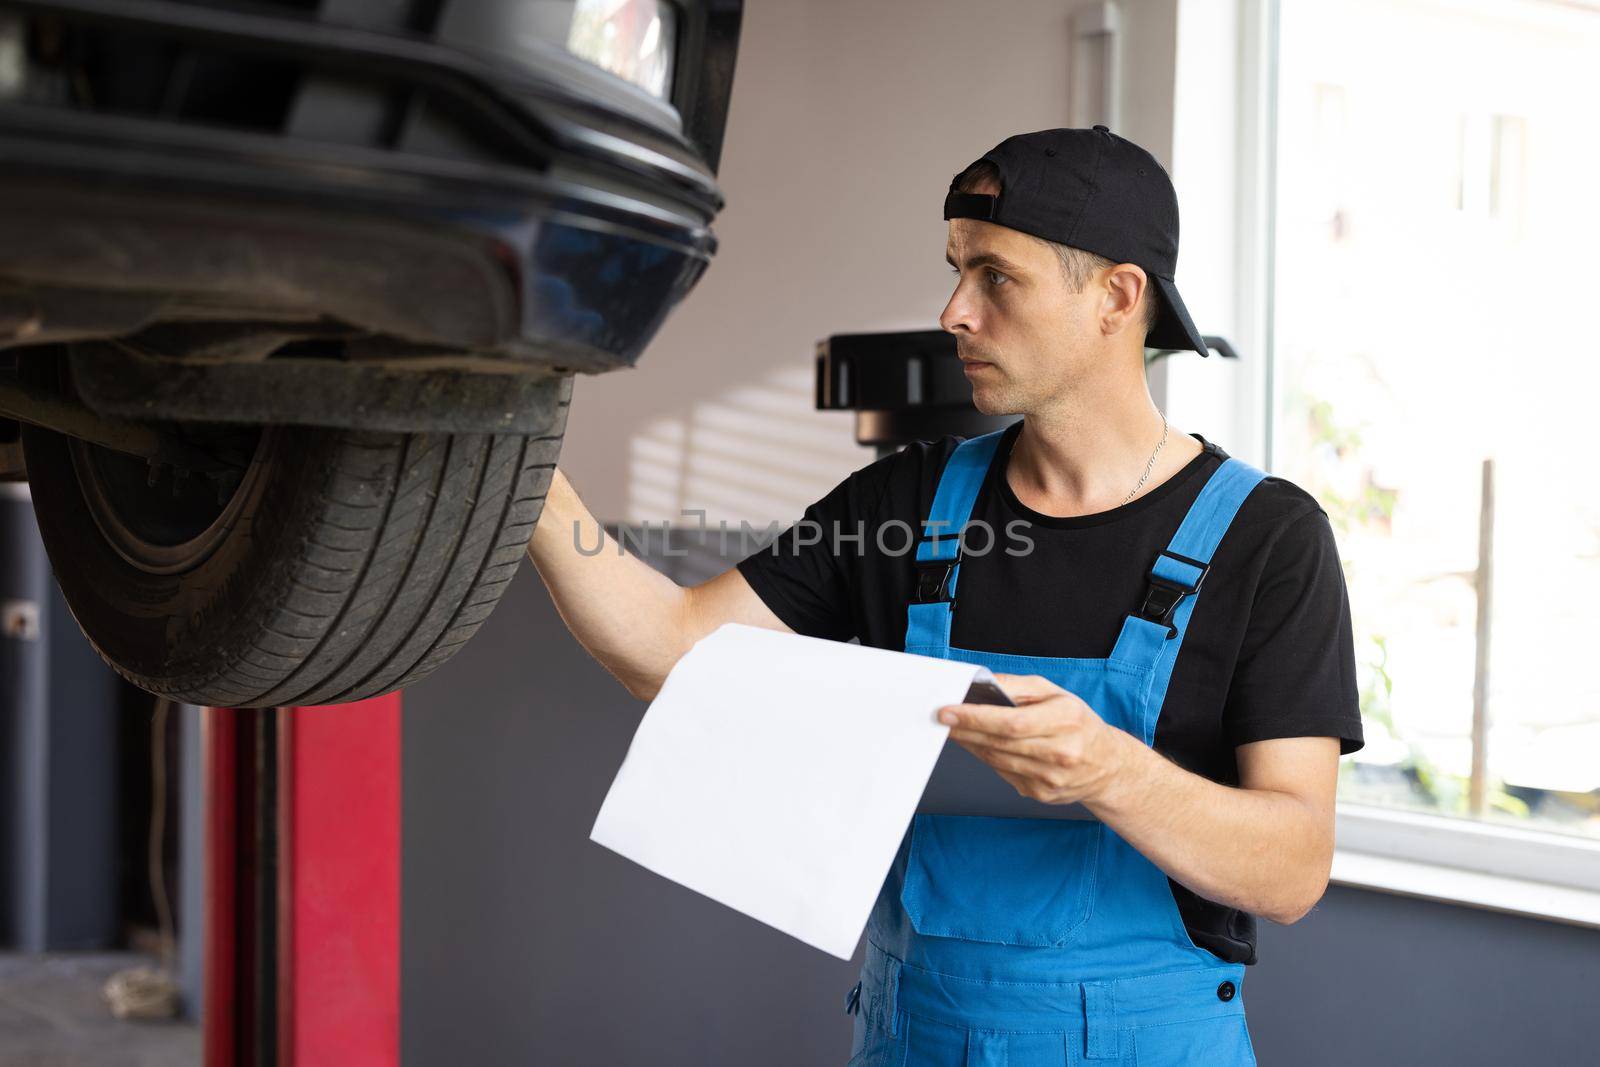 Car service employe inspect car. Mechanic inspects the car undercarriage way and makes a note on his inspection sheet. Automobile service, car mechanic. Modern workshop